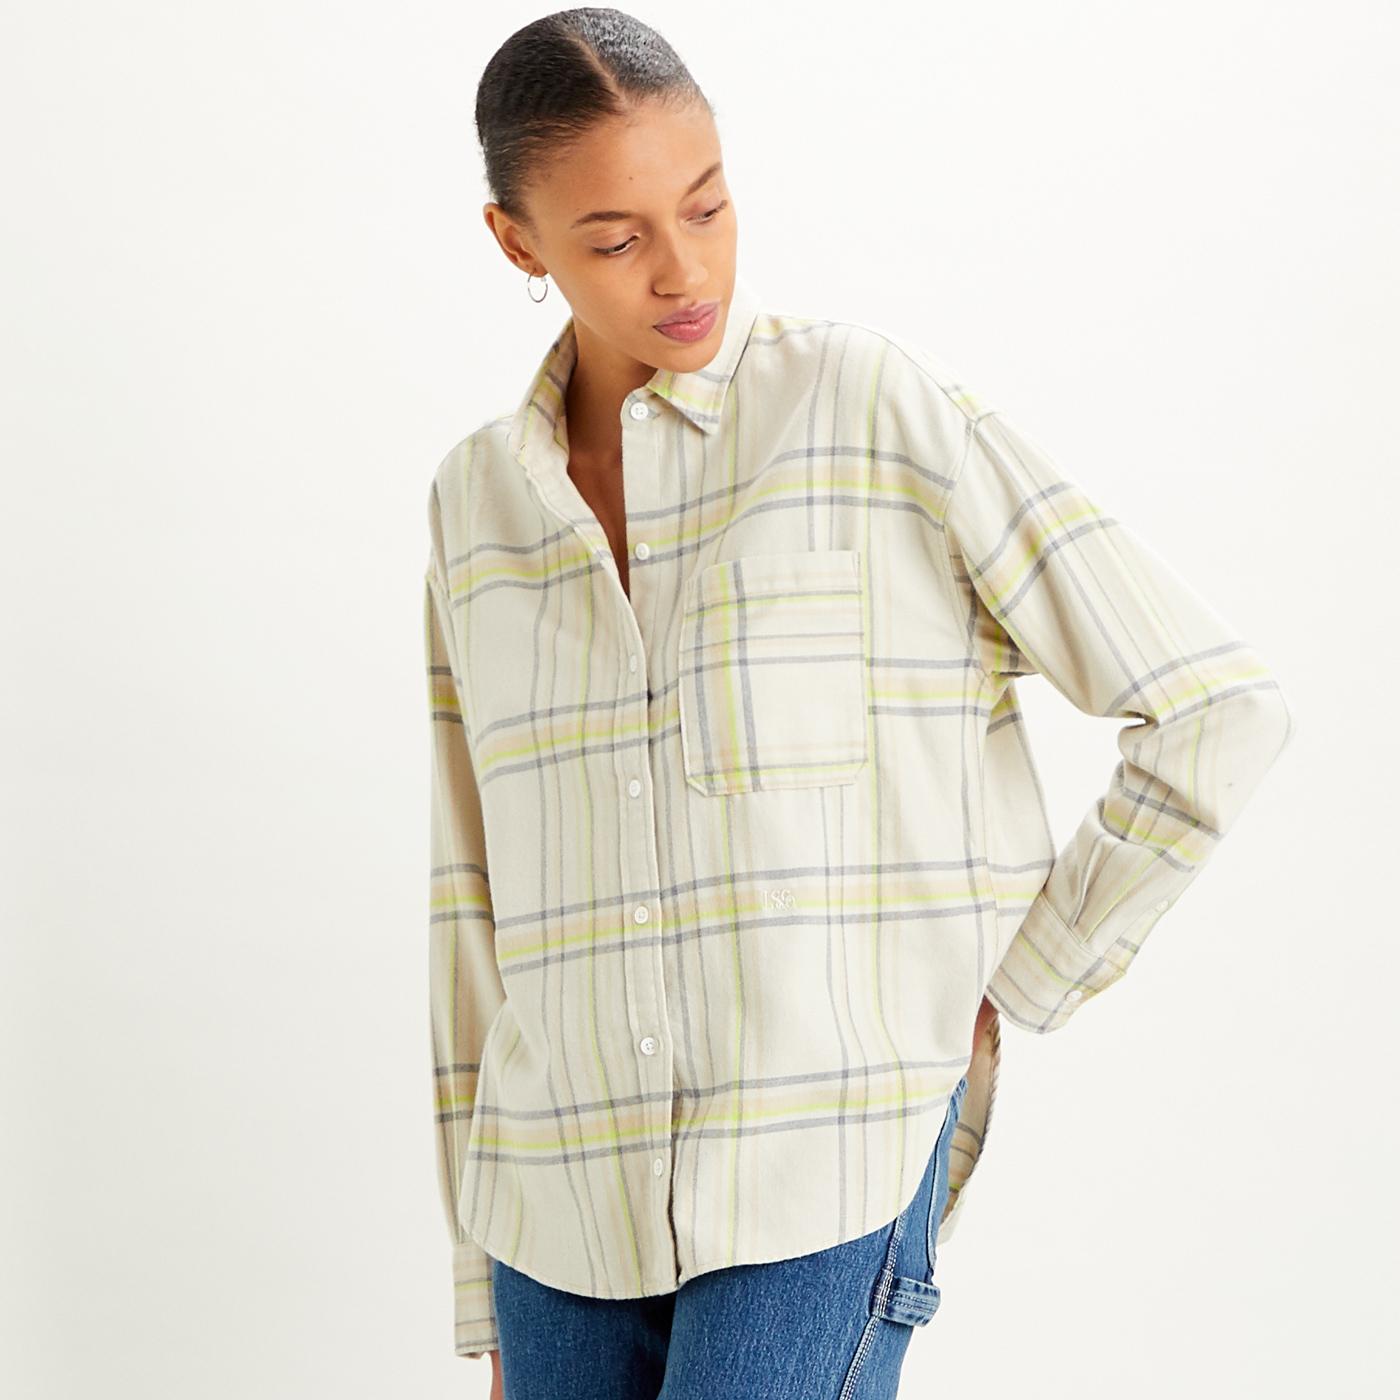 LEVI'S Retro Vintage Check Relaxed Shirt in Whittier Almond Milk